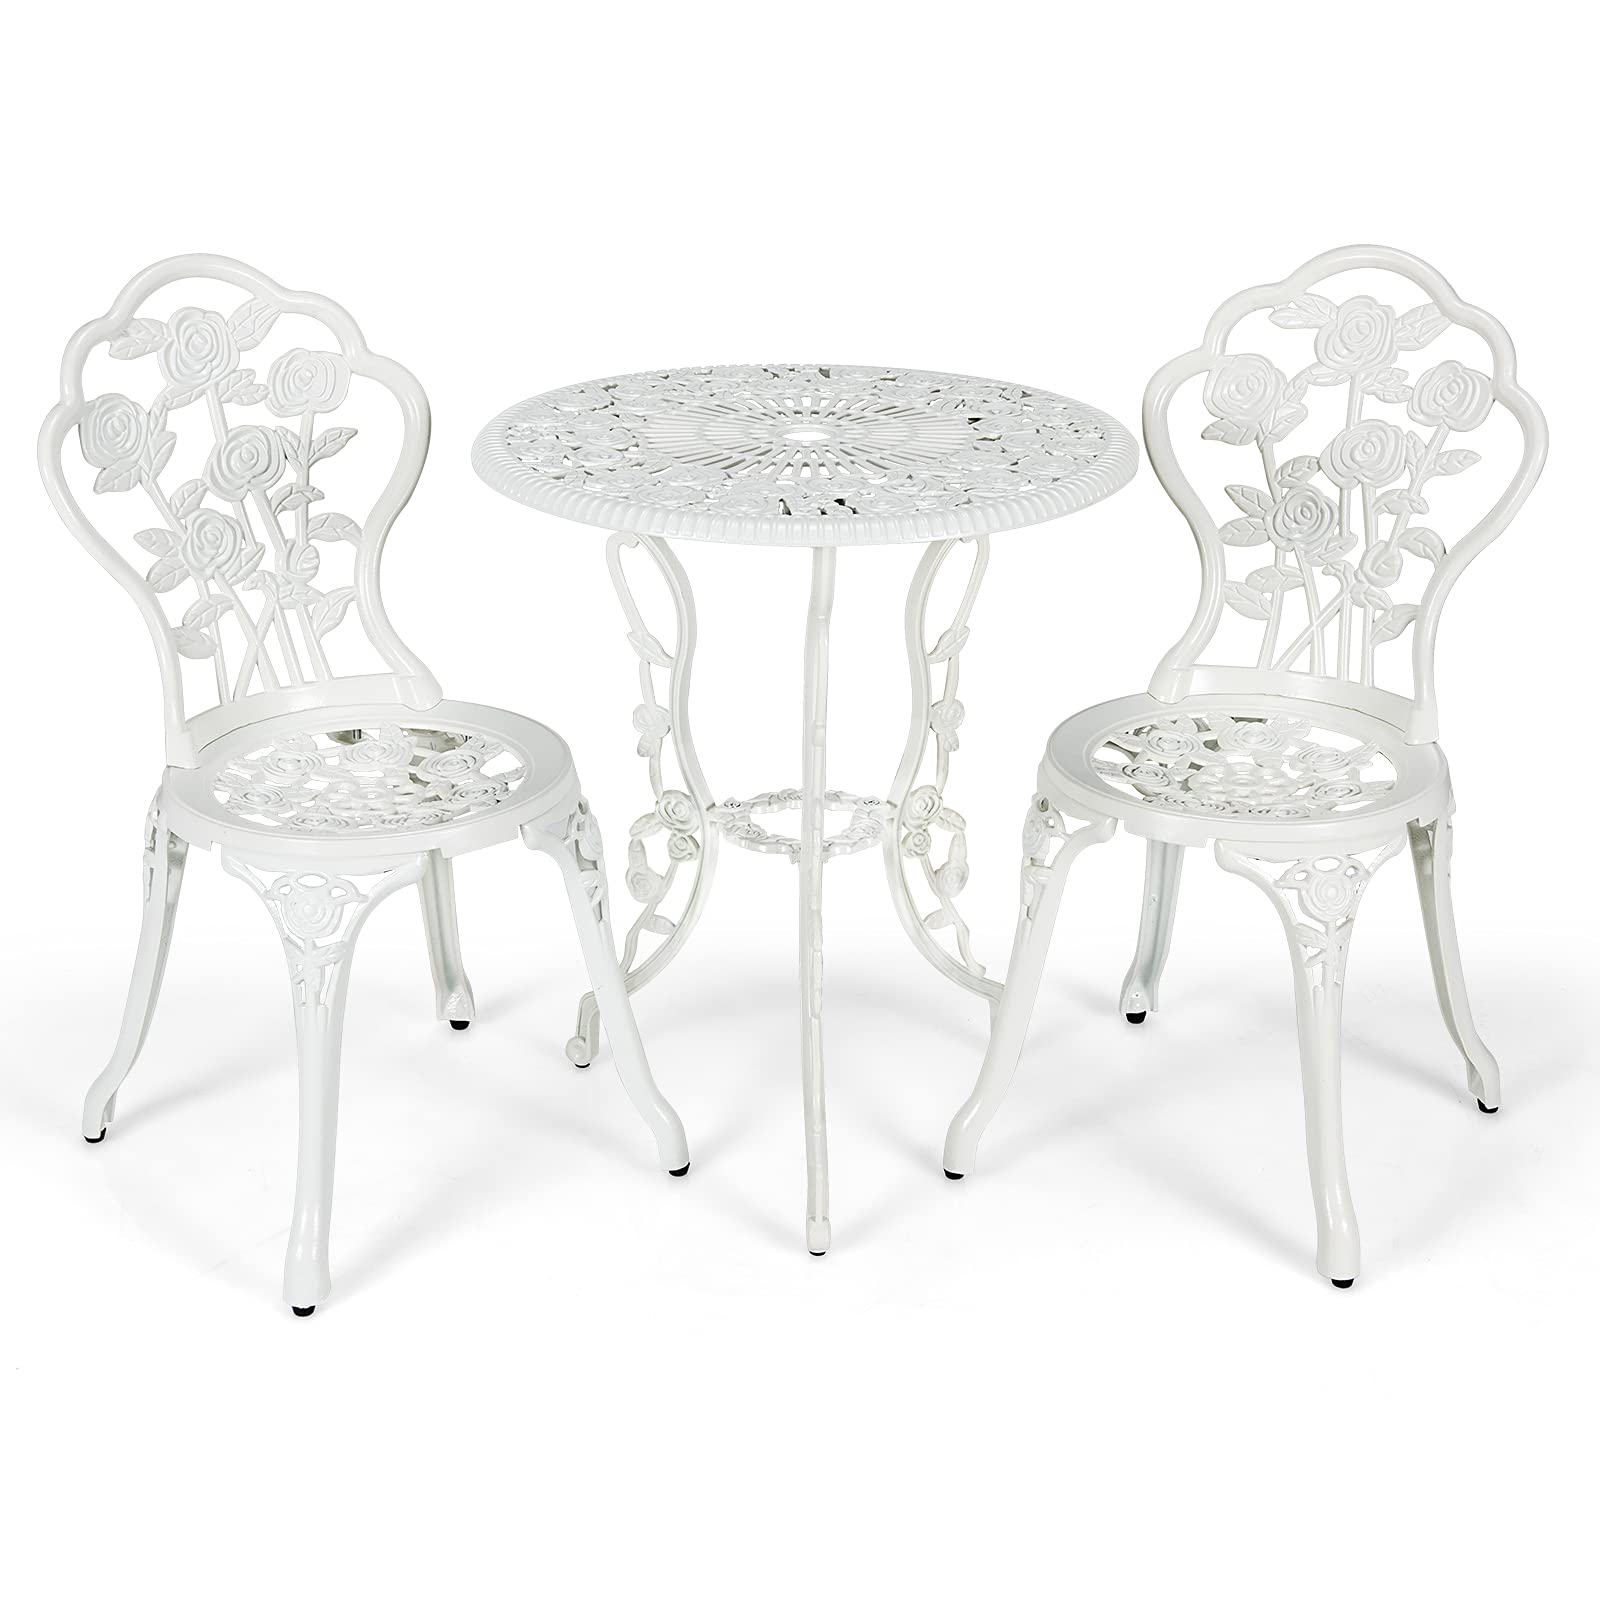 Giantex 3 Piece Bistro Set, Cast Aluminum Porch Furniture, Outdoor Patio Dining Table and Chairs with Umbrella Hole